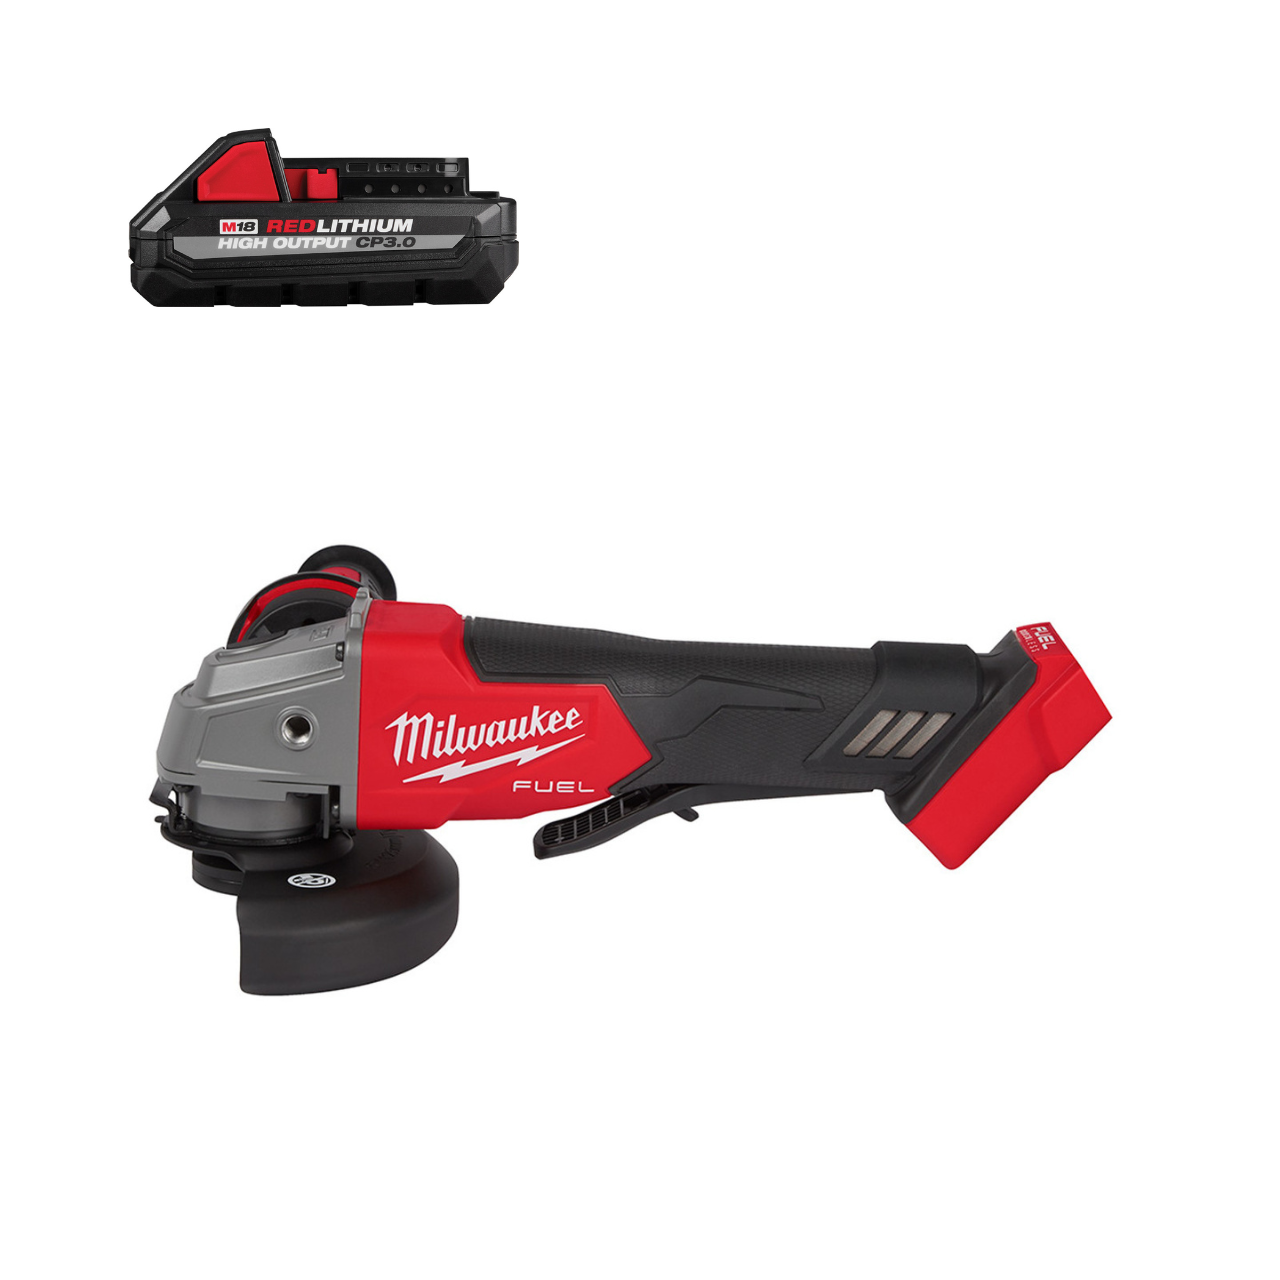 Milwaukee 2880-20 M18 FUEL 4-1/2" / 5" Grinder Paddle Switch + FREE Milwaukee 48-11-1835 M18 CP3.0 Battery